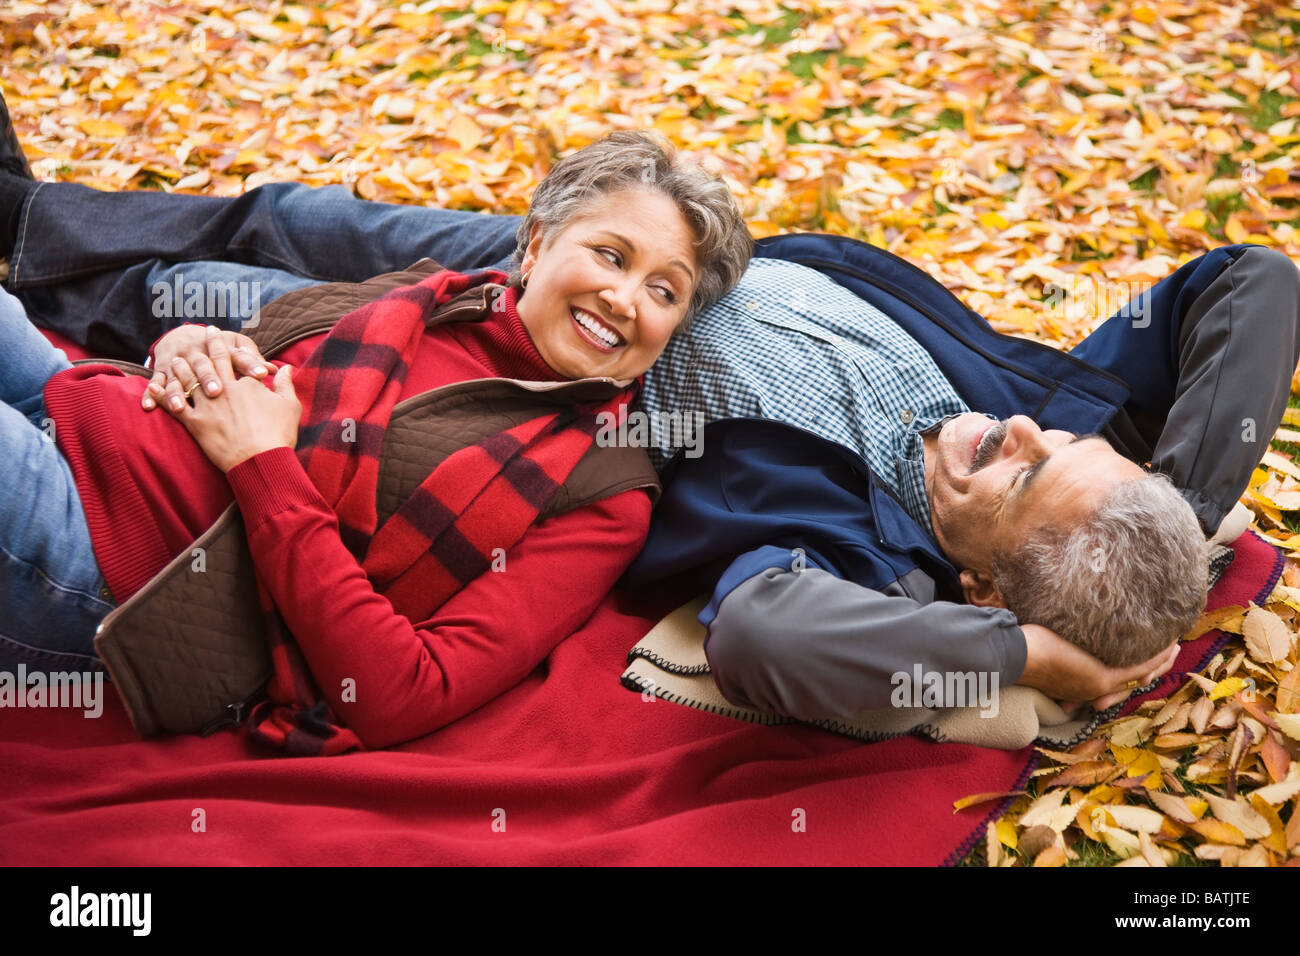 African couple laying on blanket among autumn leaves Stock Photo